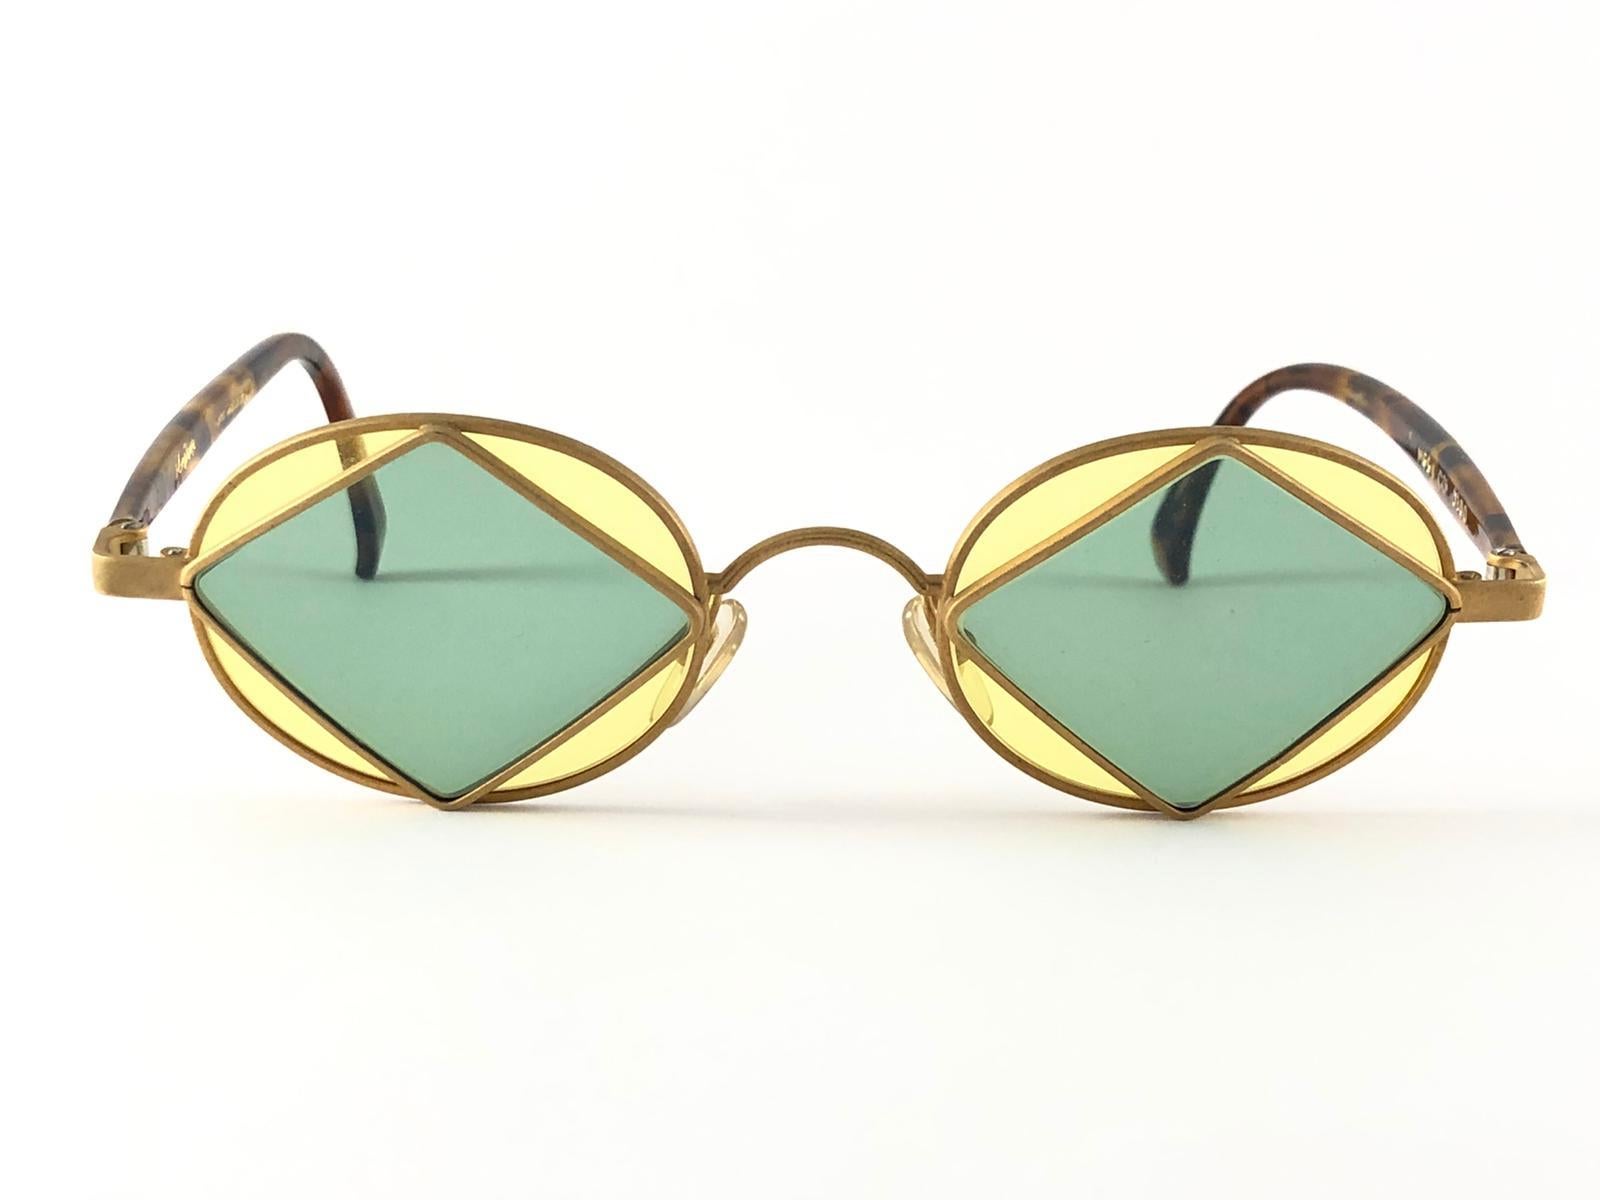 New Vintage Montana frame in matte gold with inner triangles with green and yellow lenses.

This item is in unworn condition. Please consider that this item is nearly 30 years old so it could show minor sign of wear due to storage.  

Made in